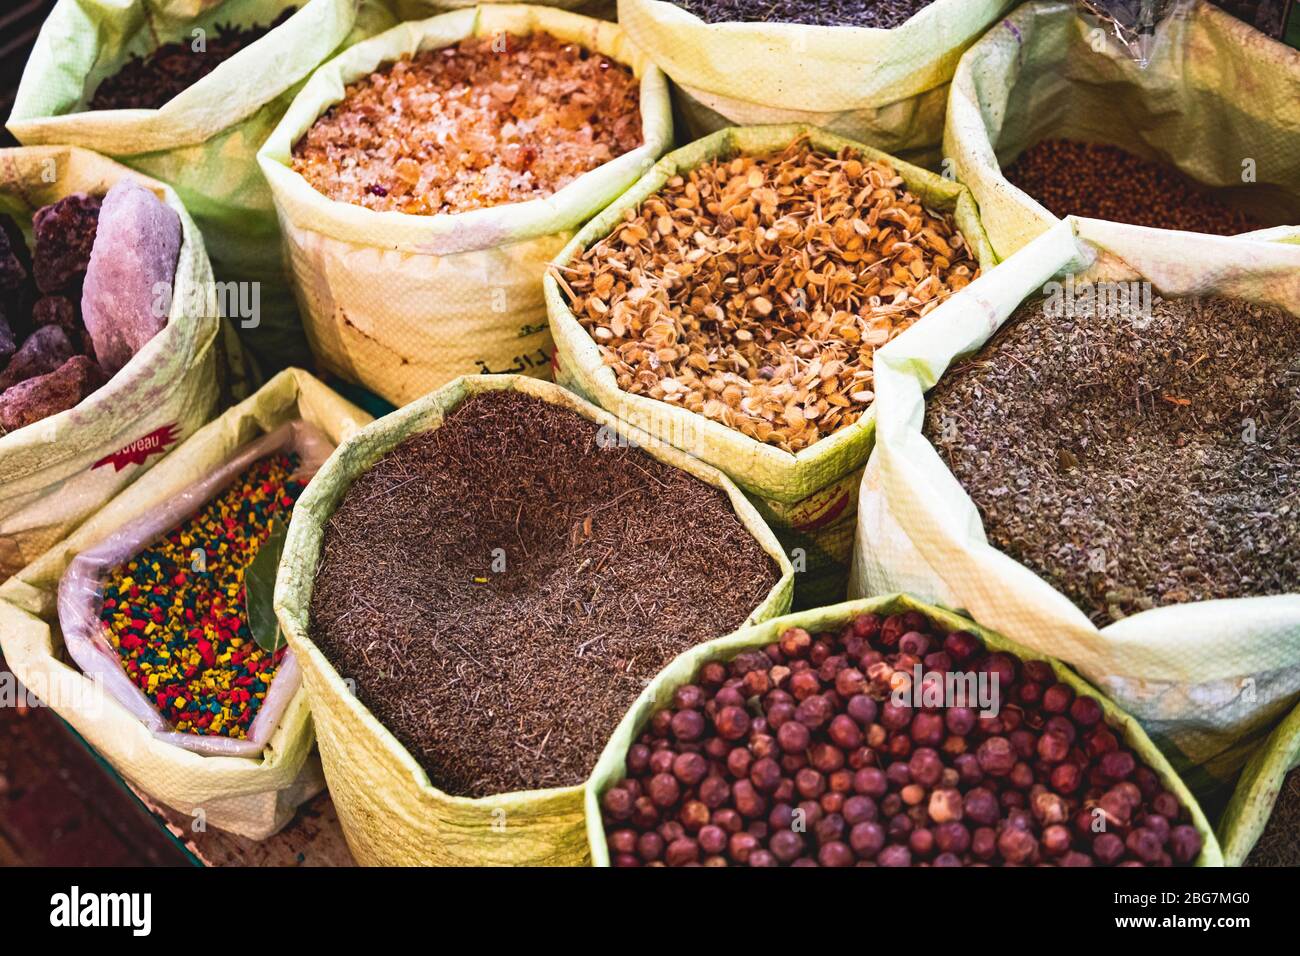 Spices in a market in Tanger, Morroco Stock Photo